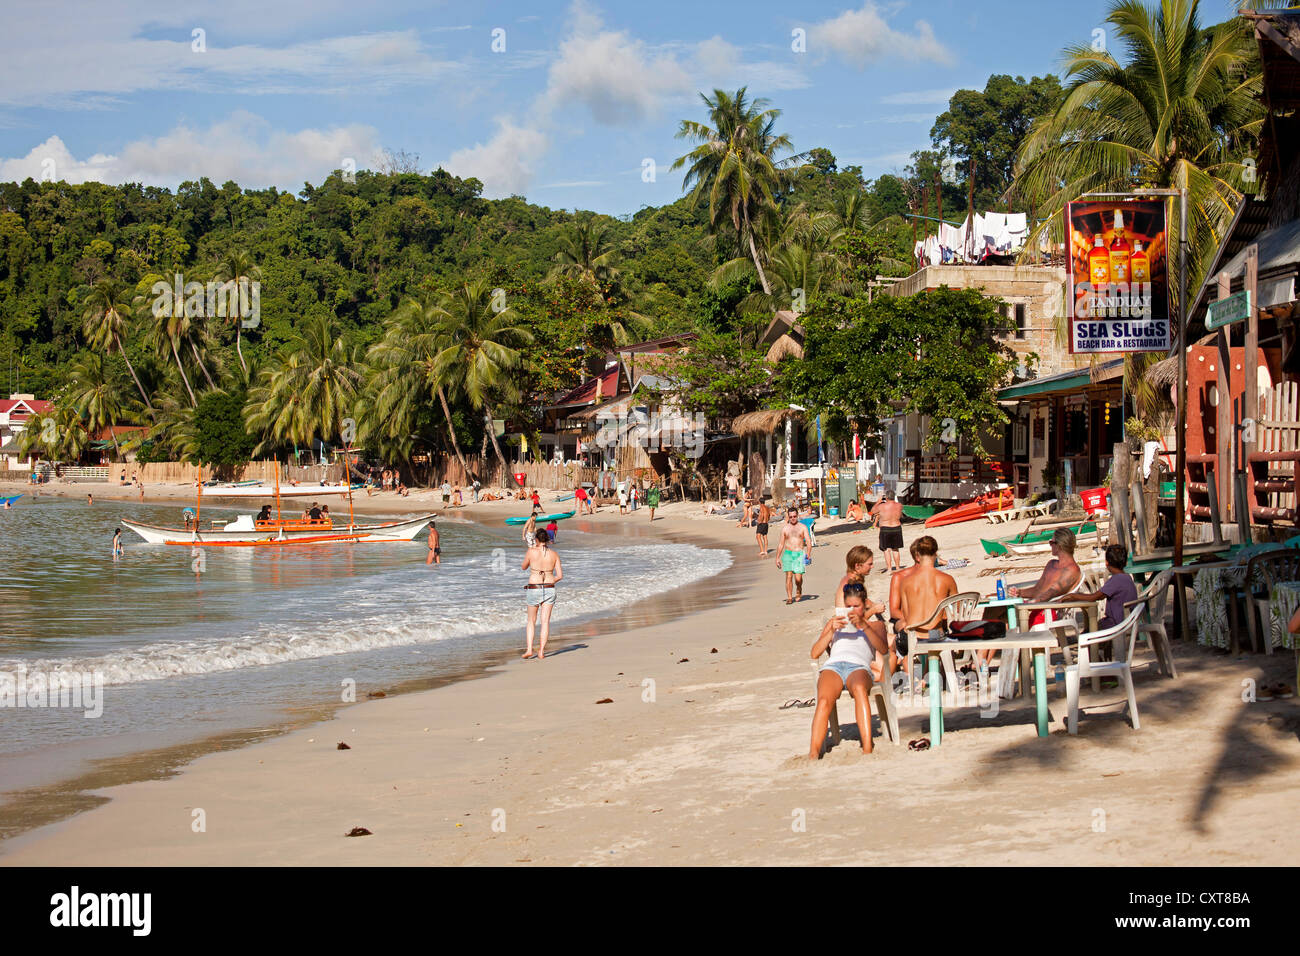 Beach bar and tourists on the beach, El Nido, Palawan, Philippines, Asia Stock Photo